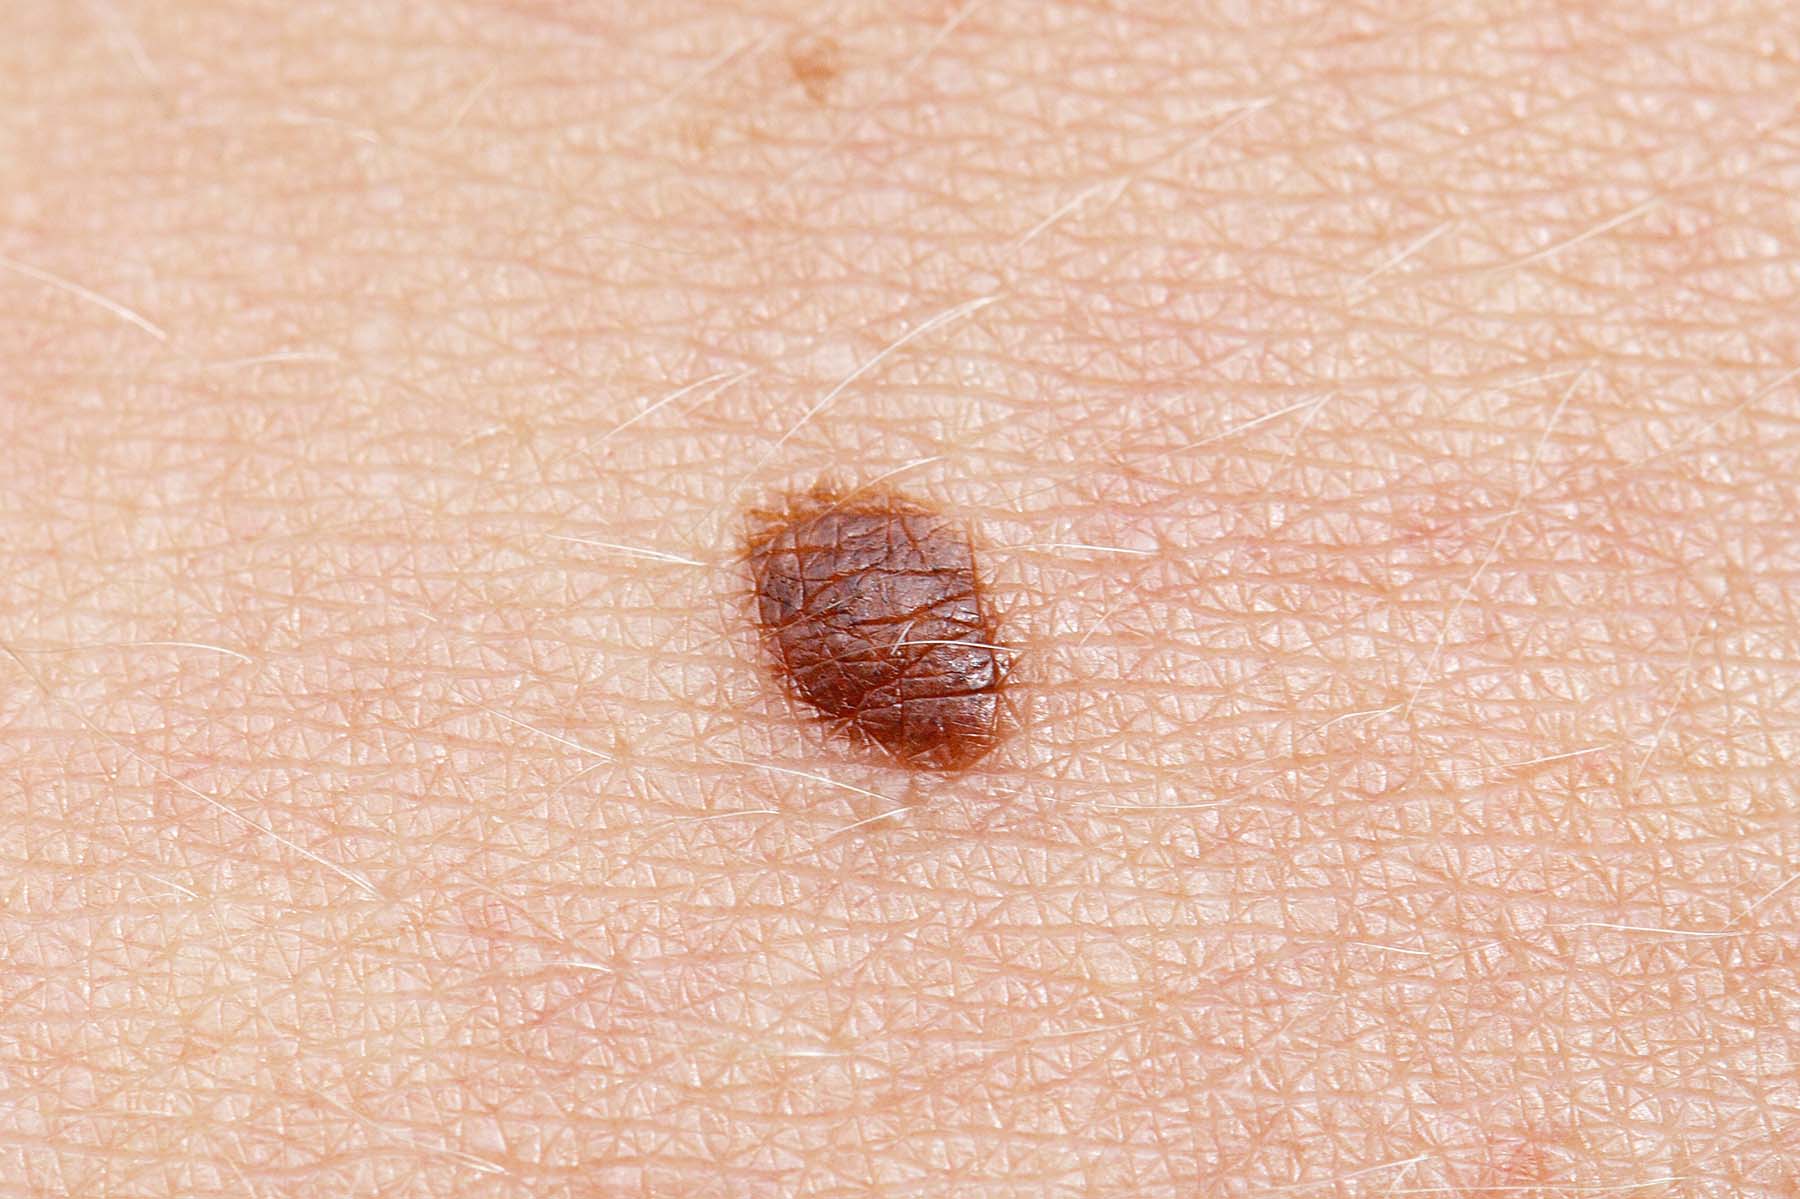 Close up of basal cell carcinoma on skin